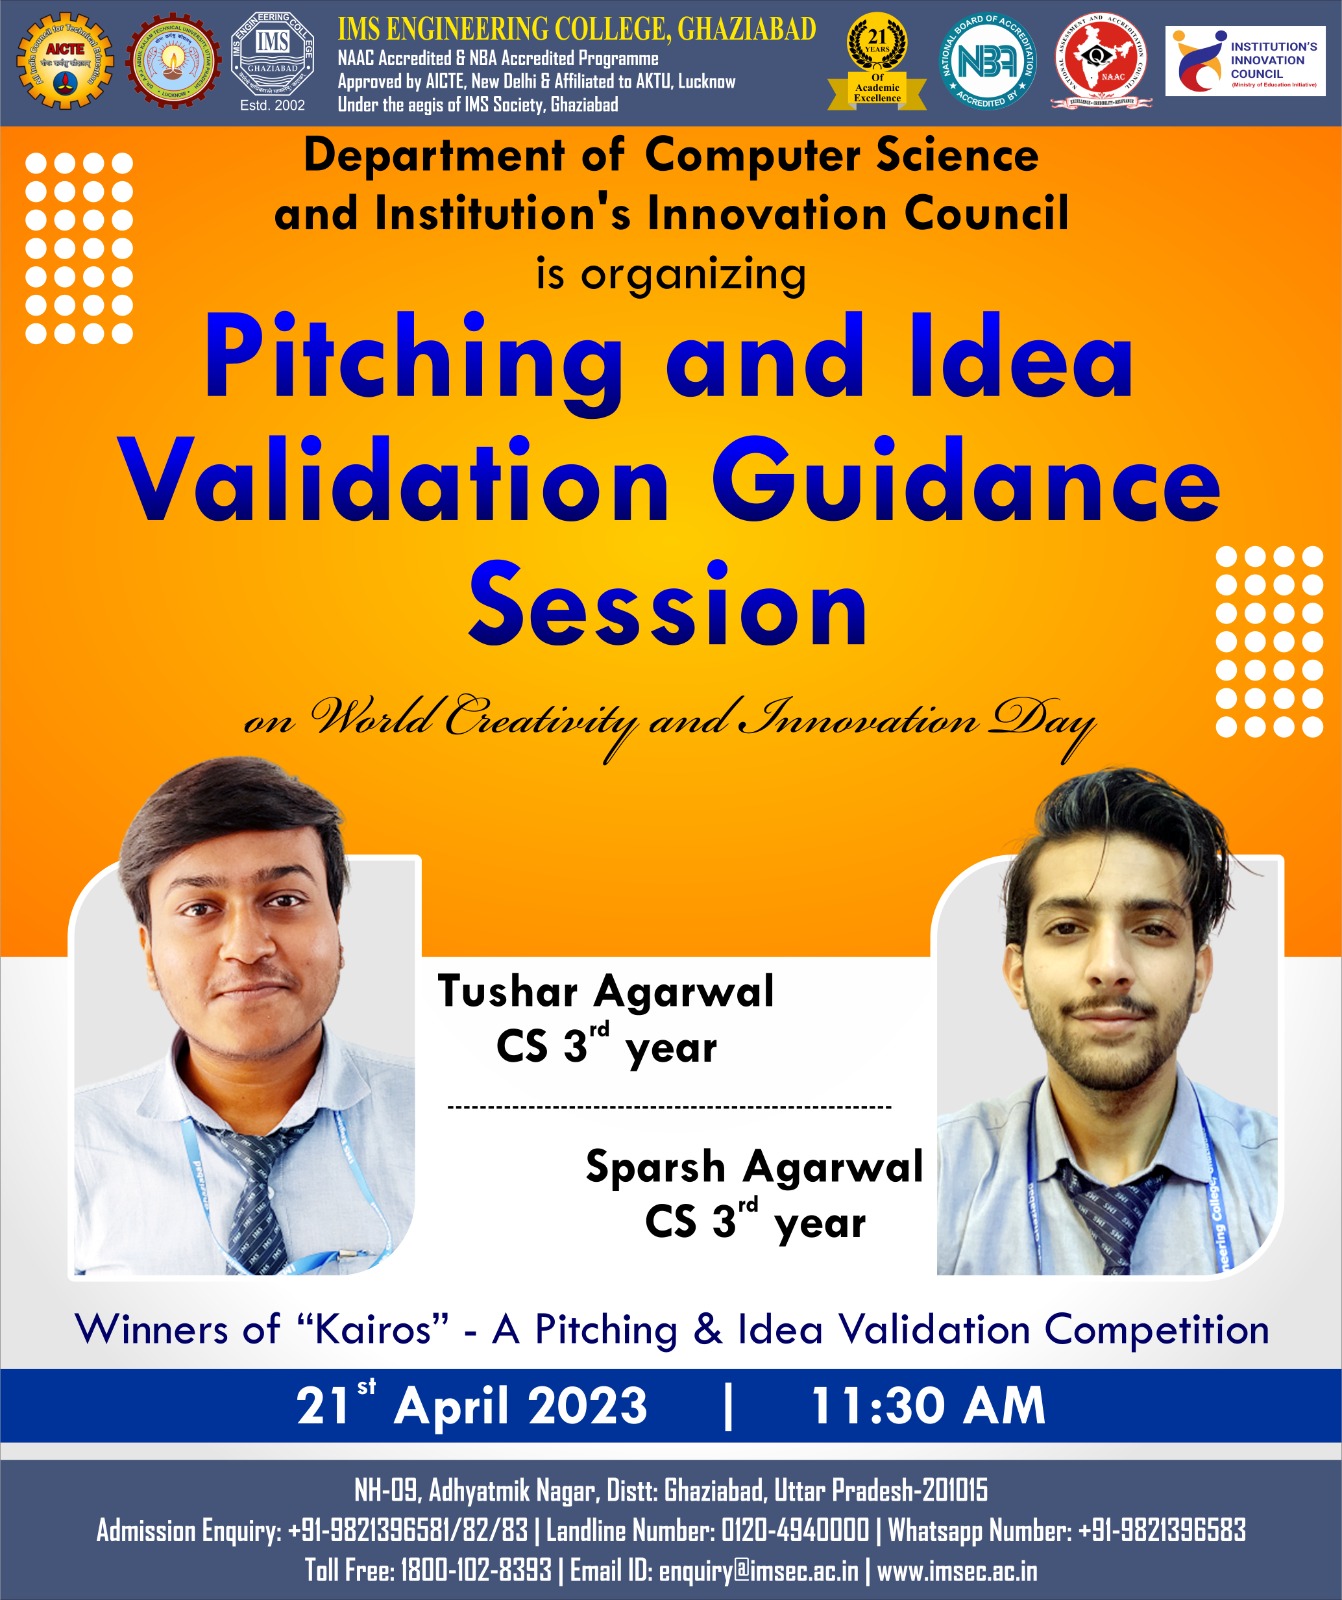 A Session on the theme of Pitching and Idea Validation Guidance